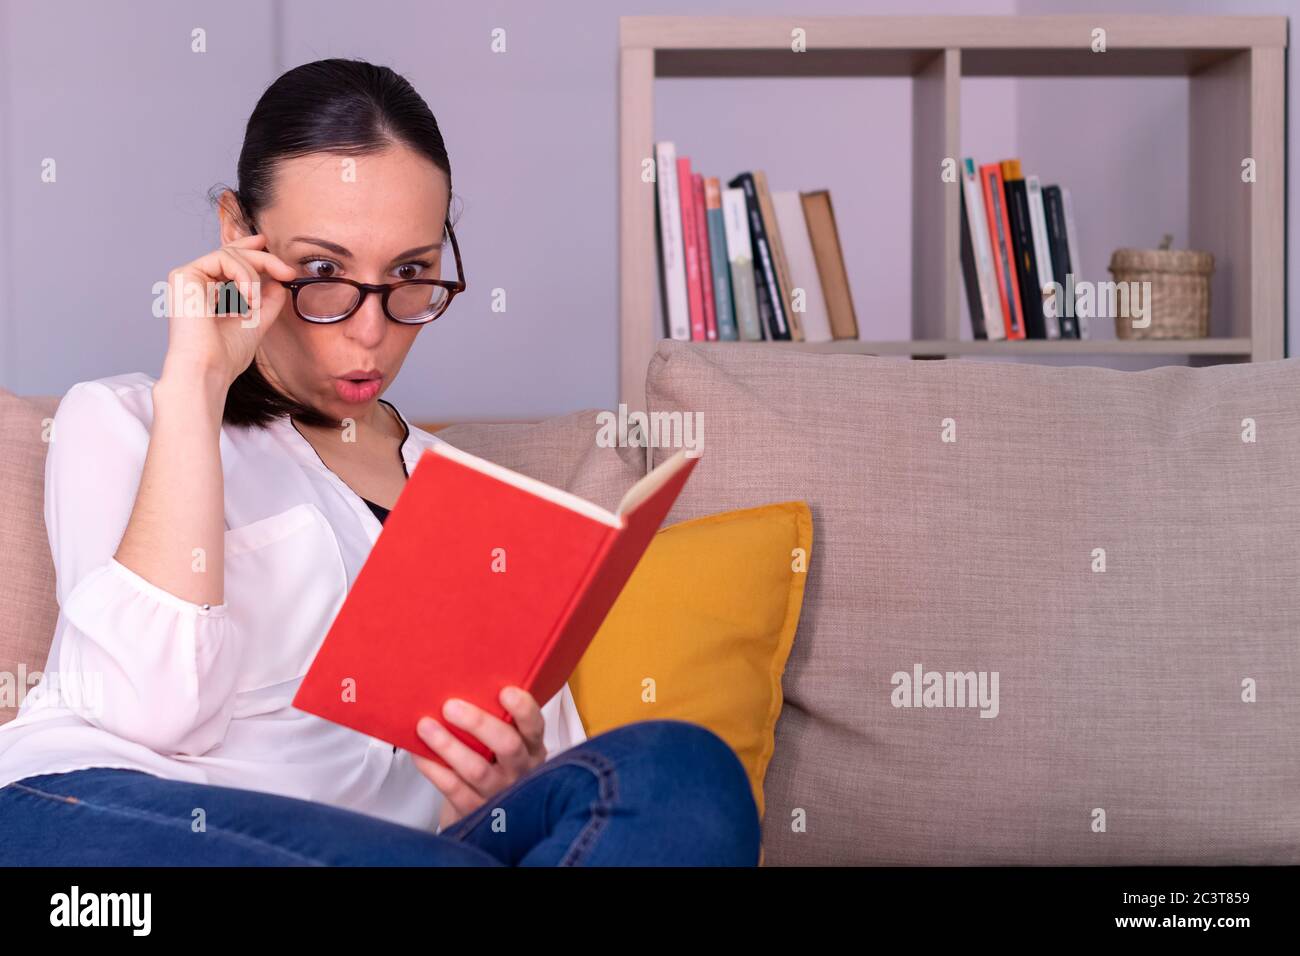 Pretty young brunette woman shocked reading a book sitting on the sofa at home. She is wearing a white shirt, glasses and a ponytail. Stock Photo